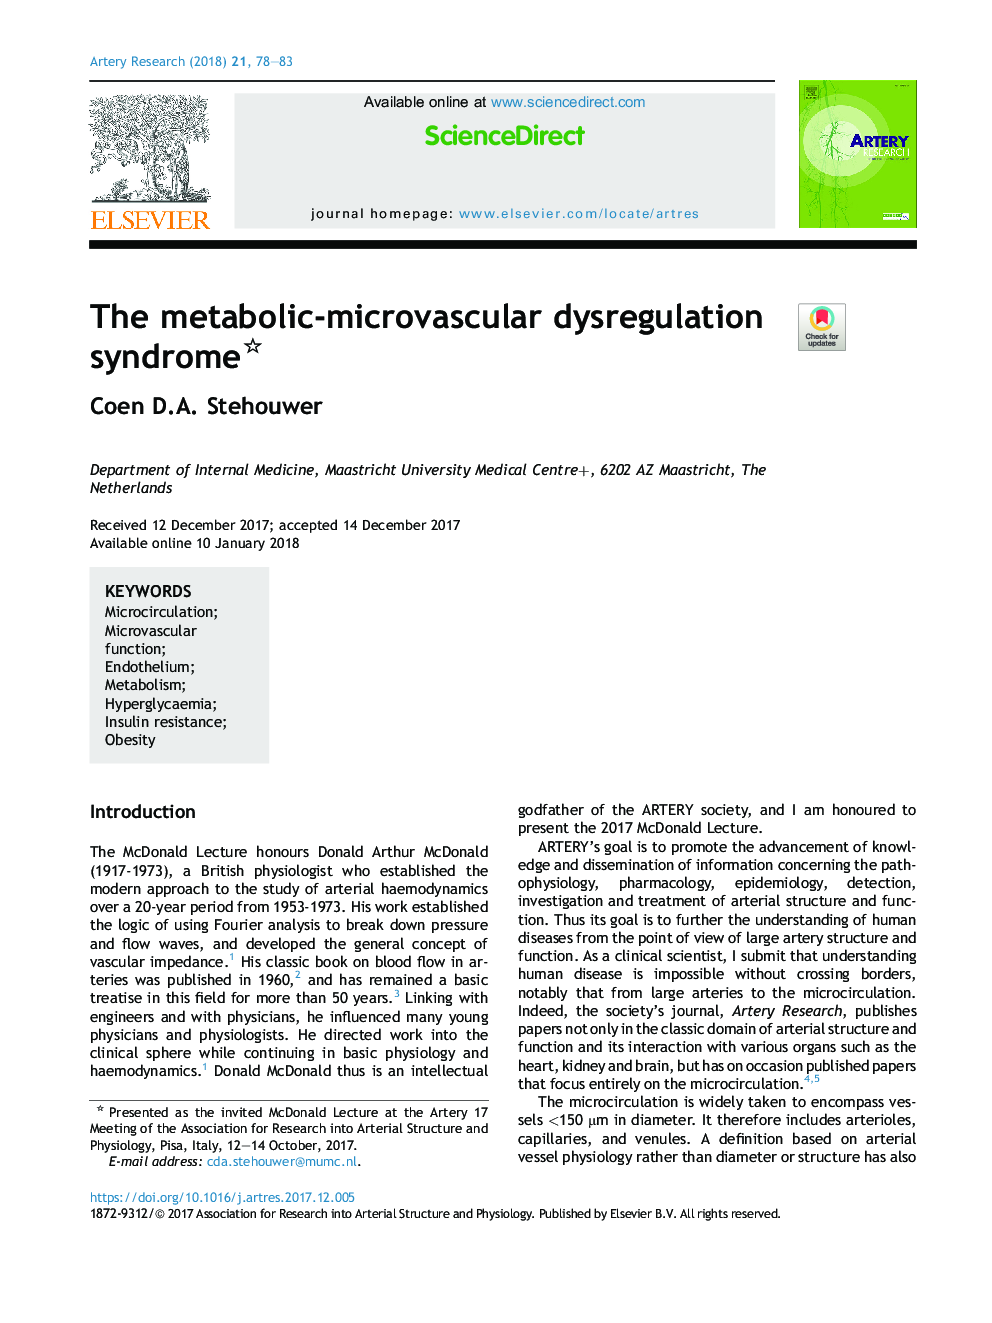 The metabolic-microvascular dysregulation syndrome